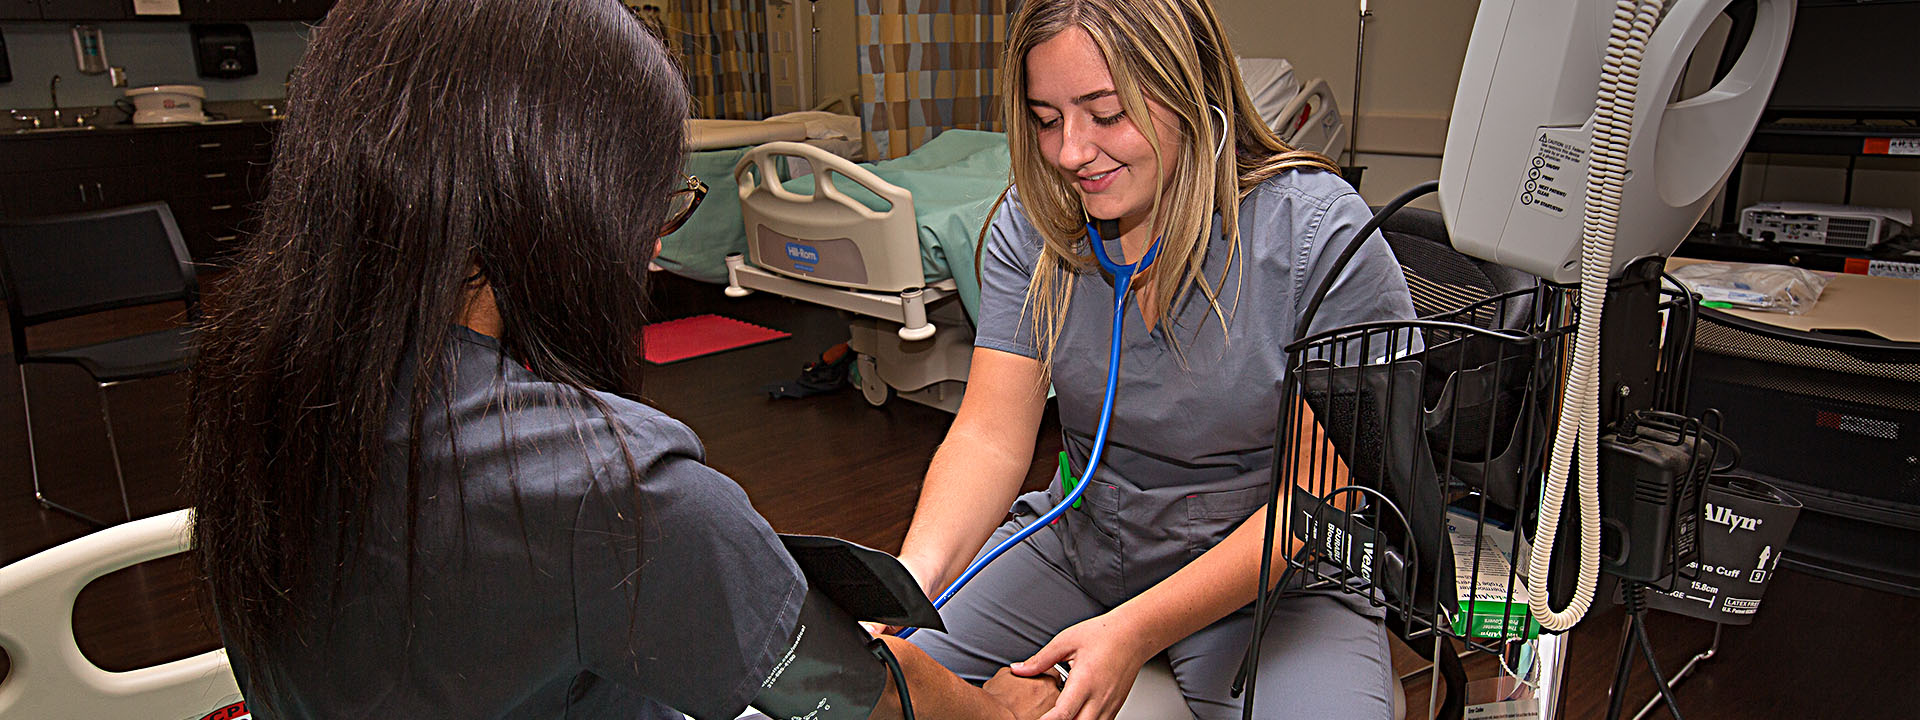 A student measuring blood pressure